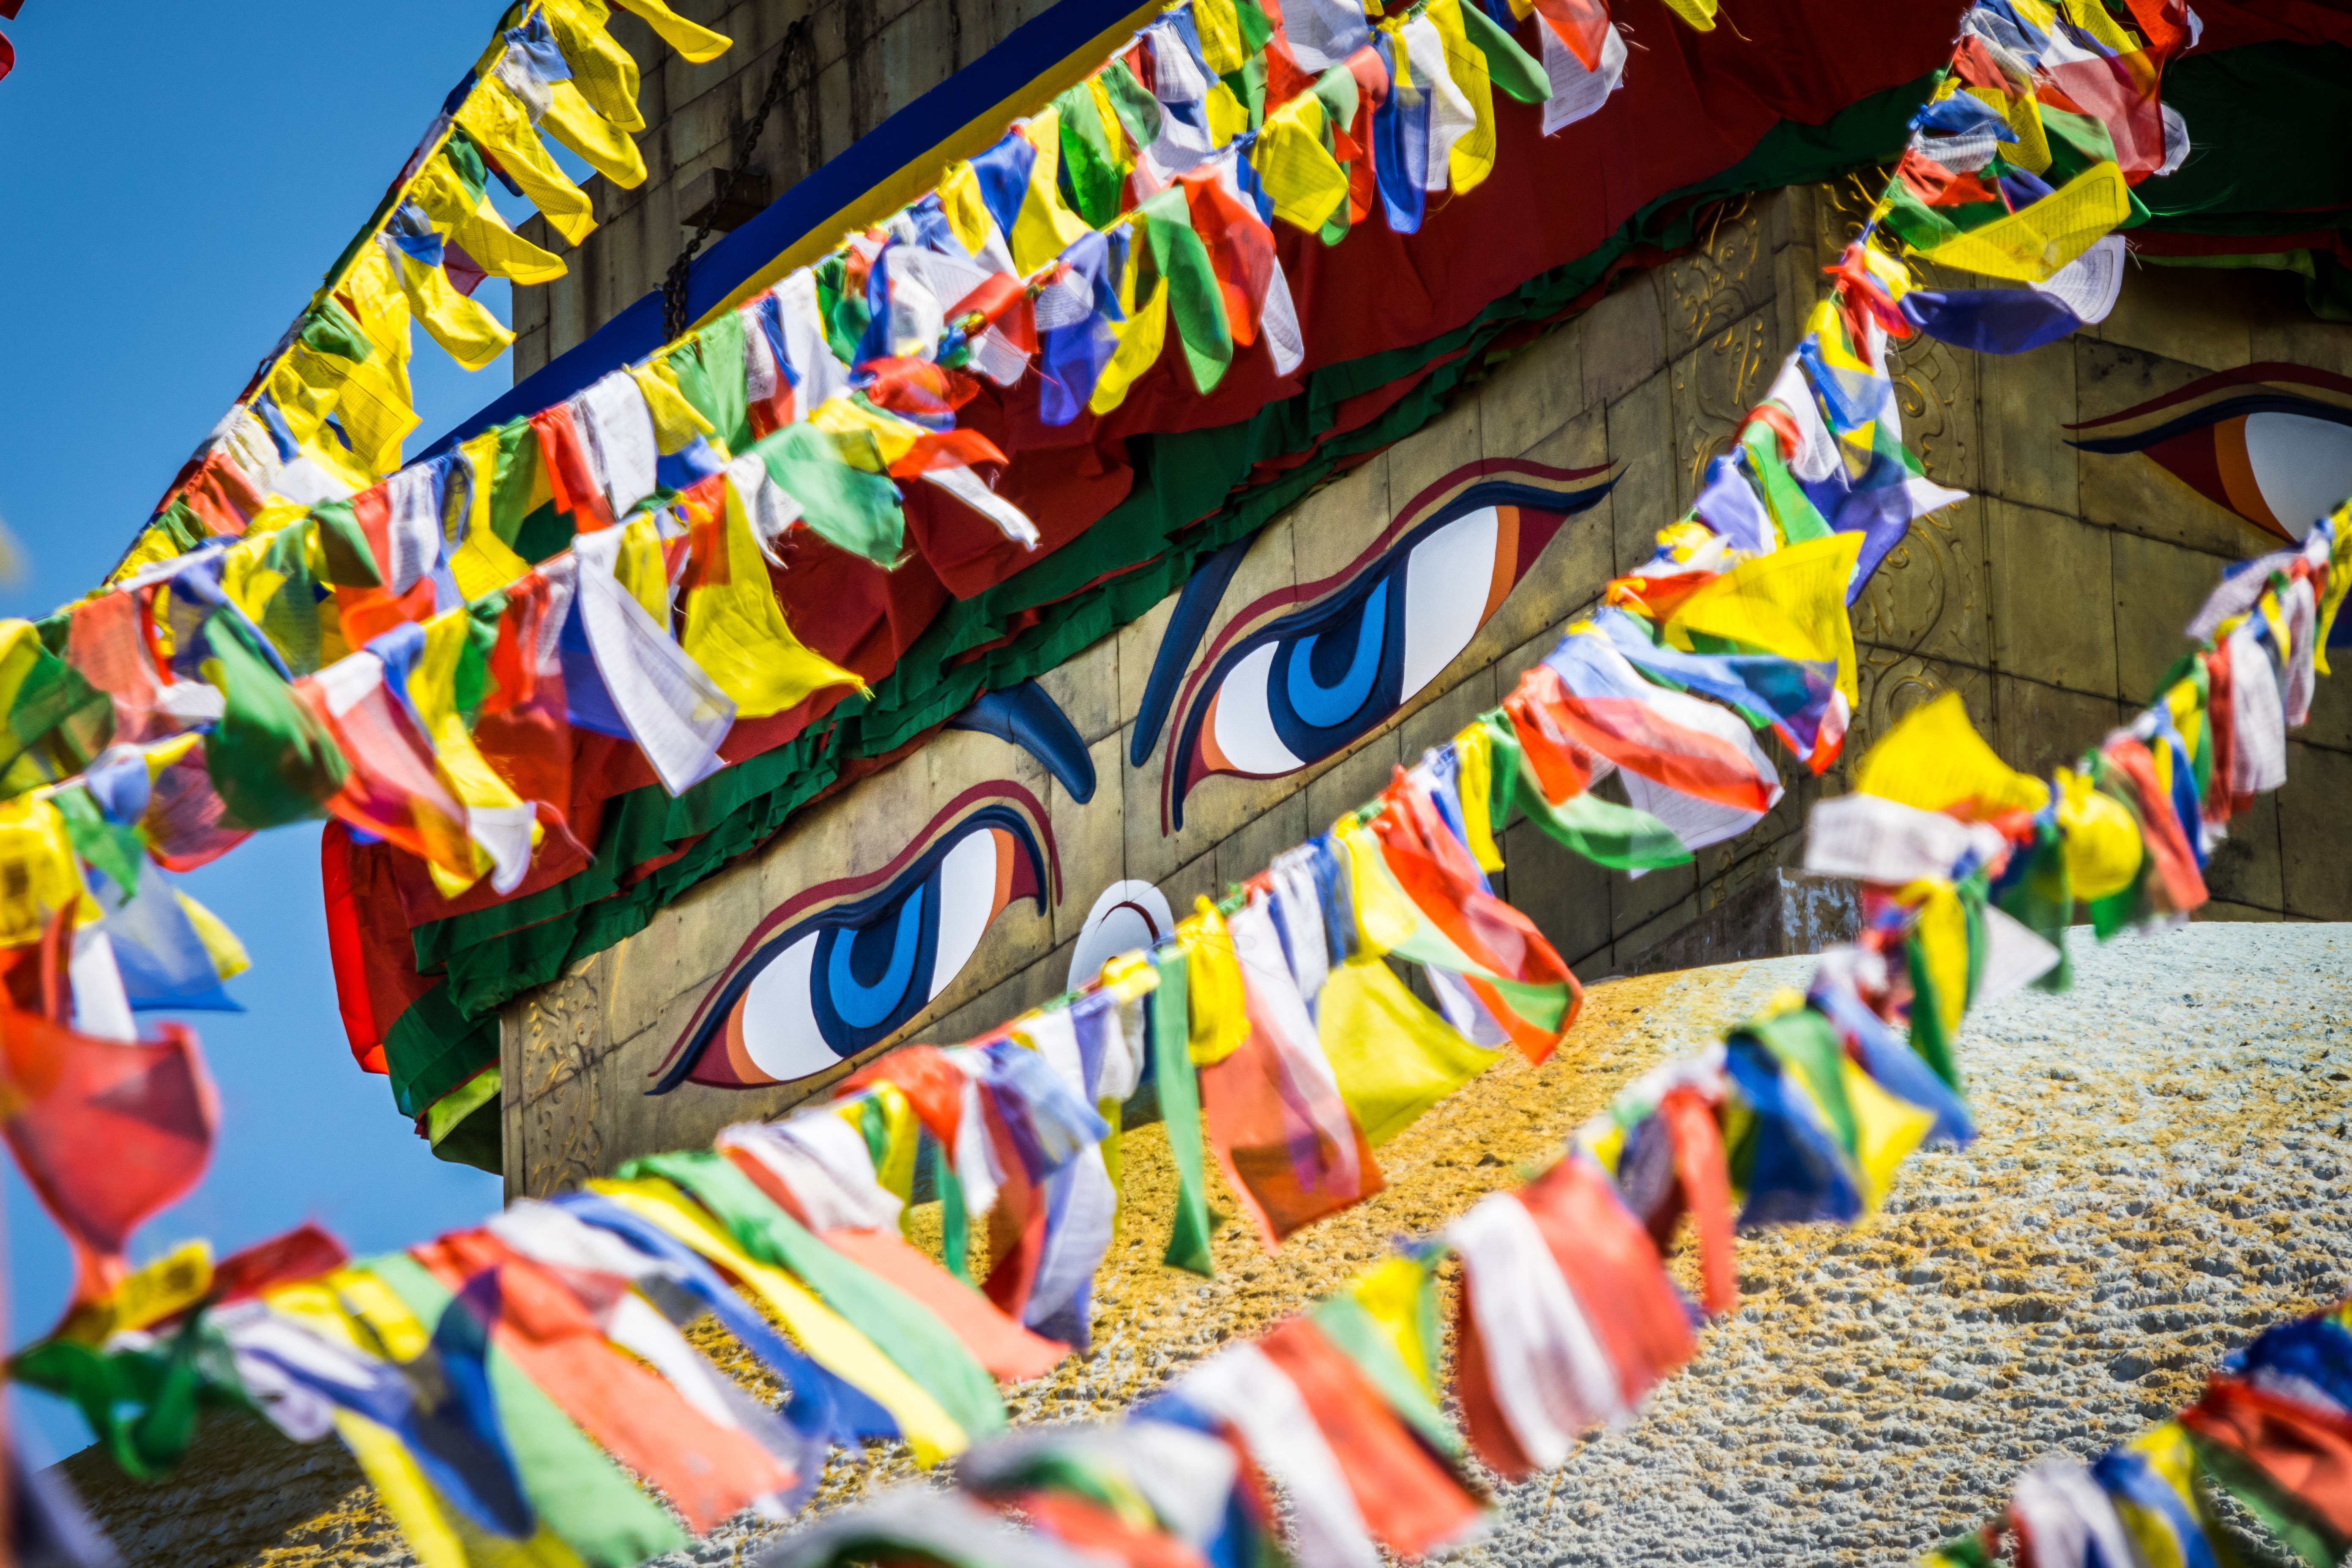 10 things you didn't know about Bhutan